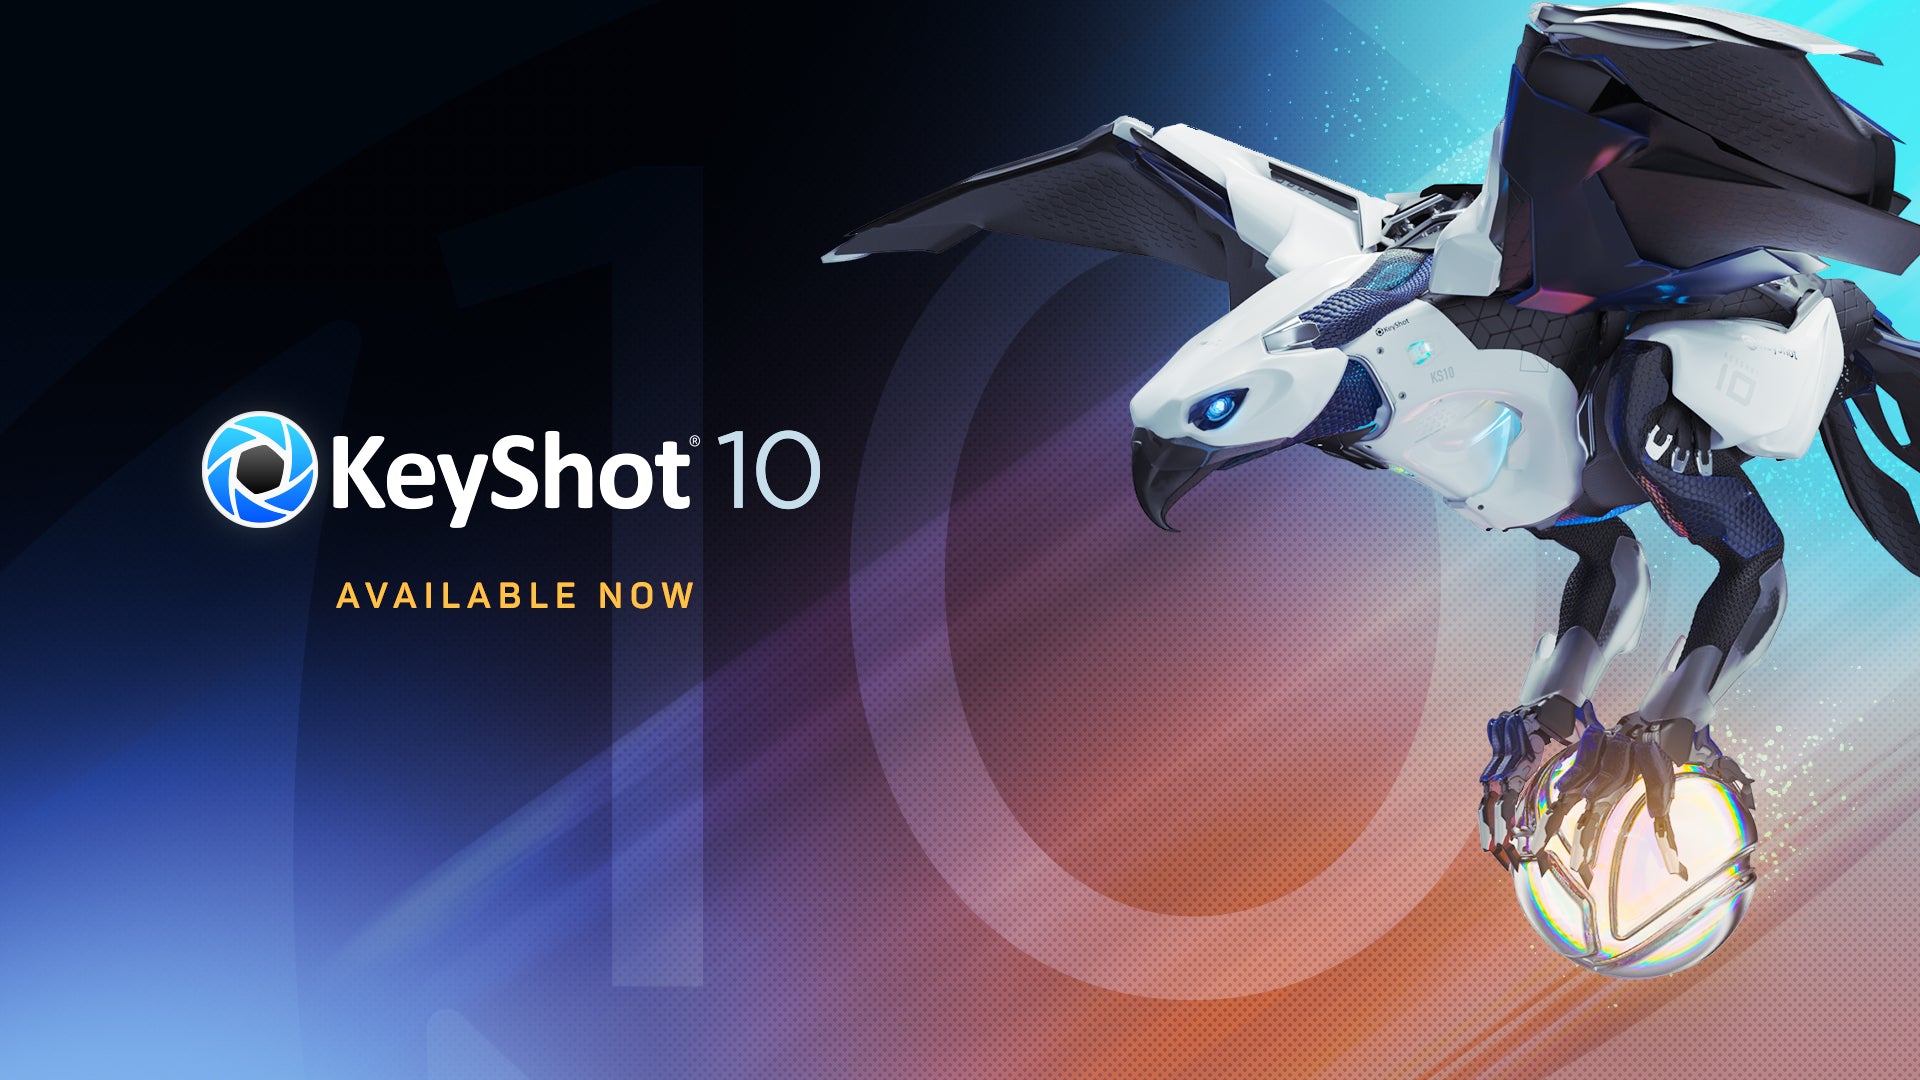 Top 10 Features Of The New KeyShot 10